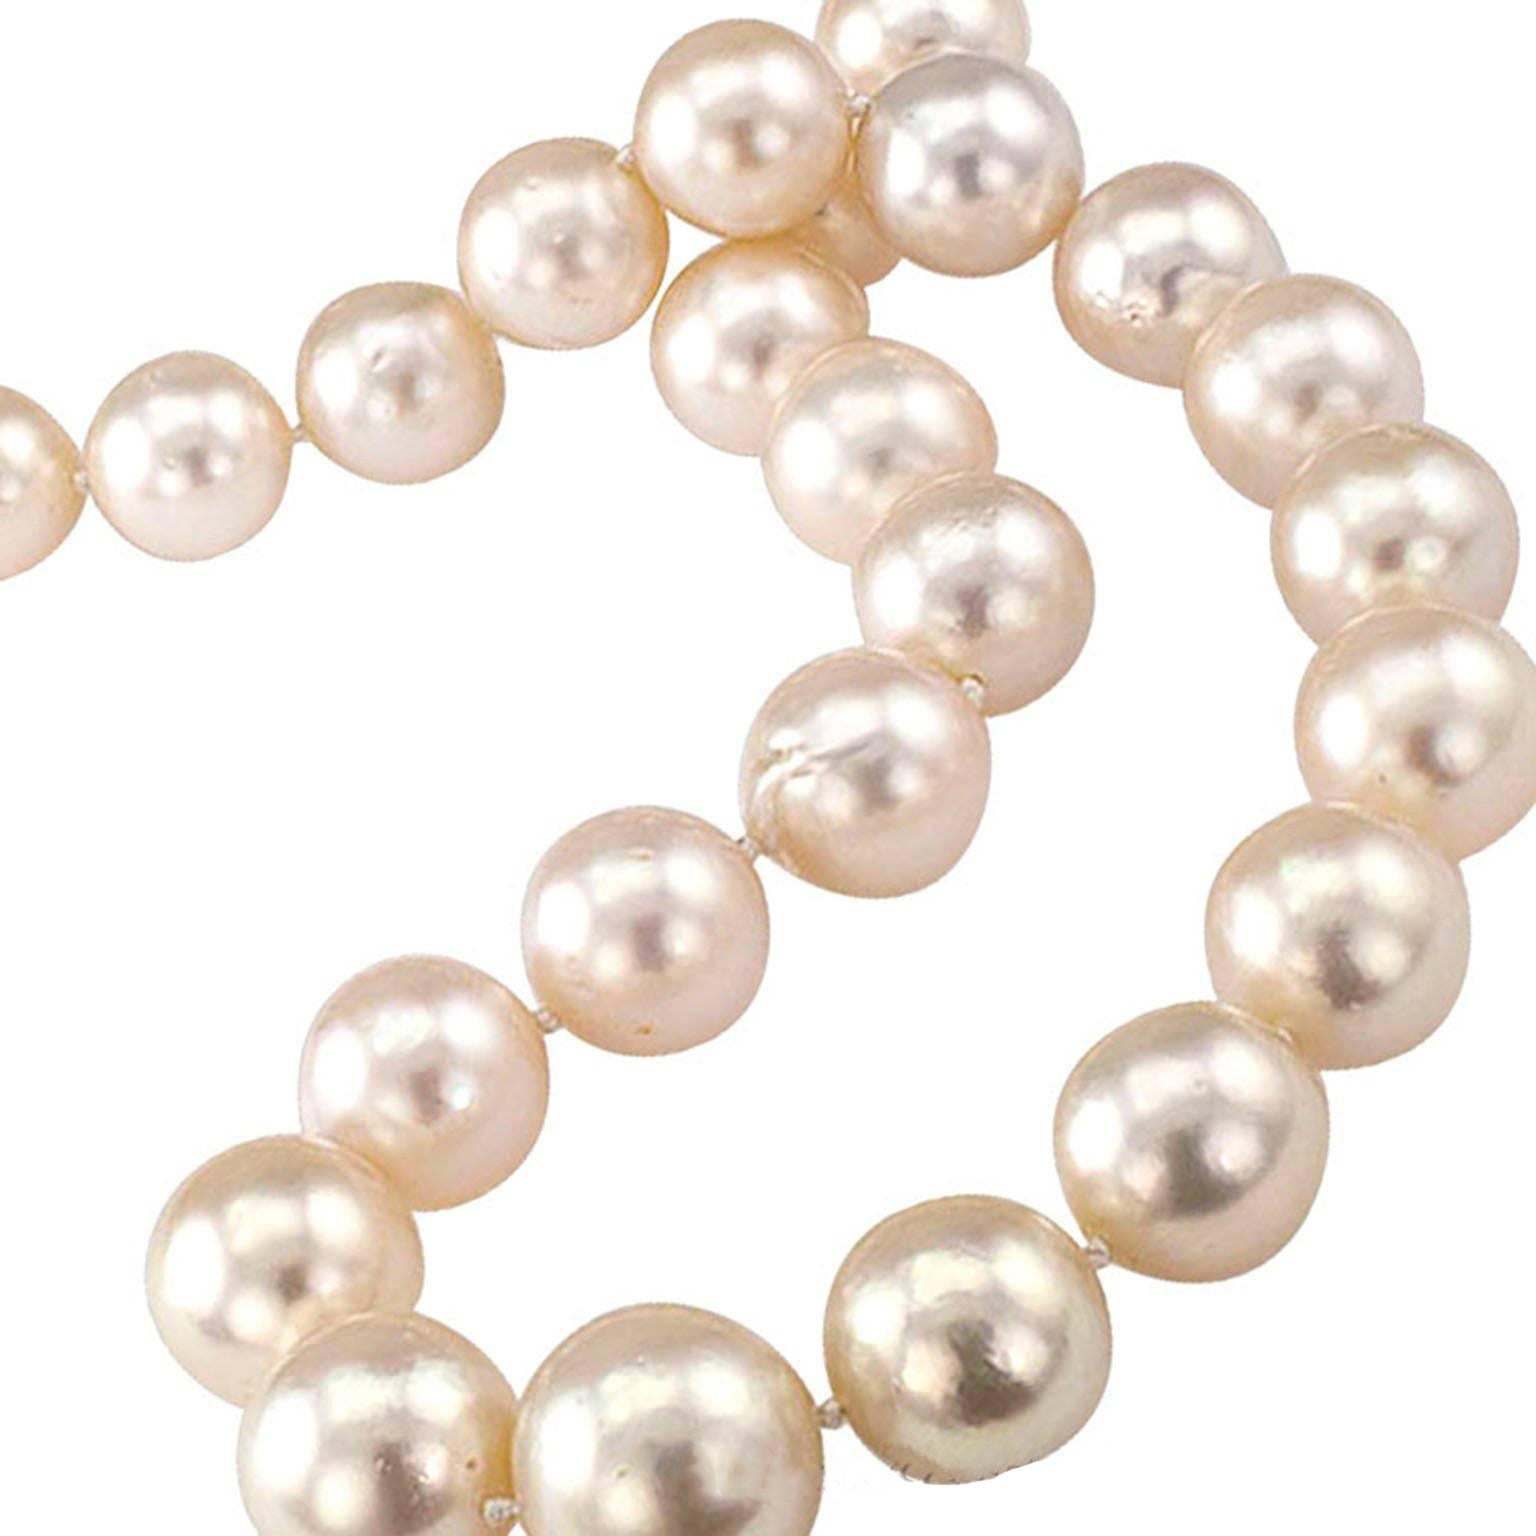 1990's Estate Graduated South Sea Pearl and Diamond Necklace

A carefully chosen South Sea Pearl necklace is always a definitive statement of Complete Elegance, the only jewel needed to be perfectly accessorized!  This outstanding single graduated